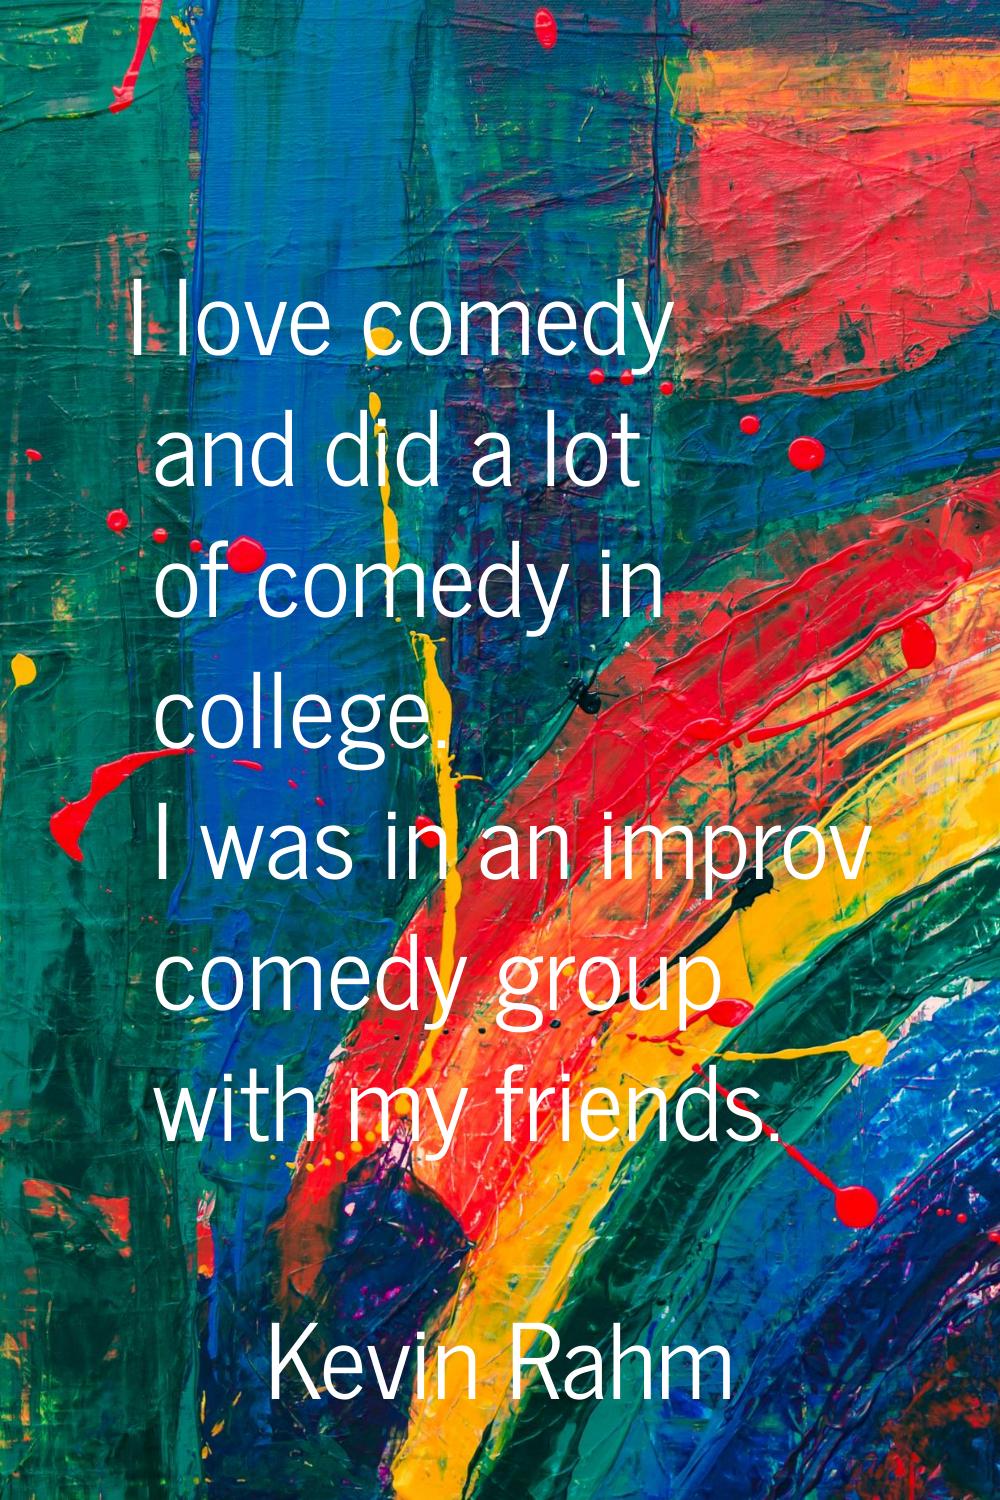 I love comedy and did a lot of comedy in college. I was in an improv comedy group with my friends.